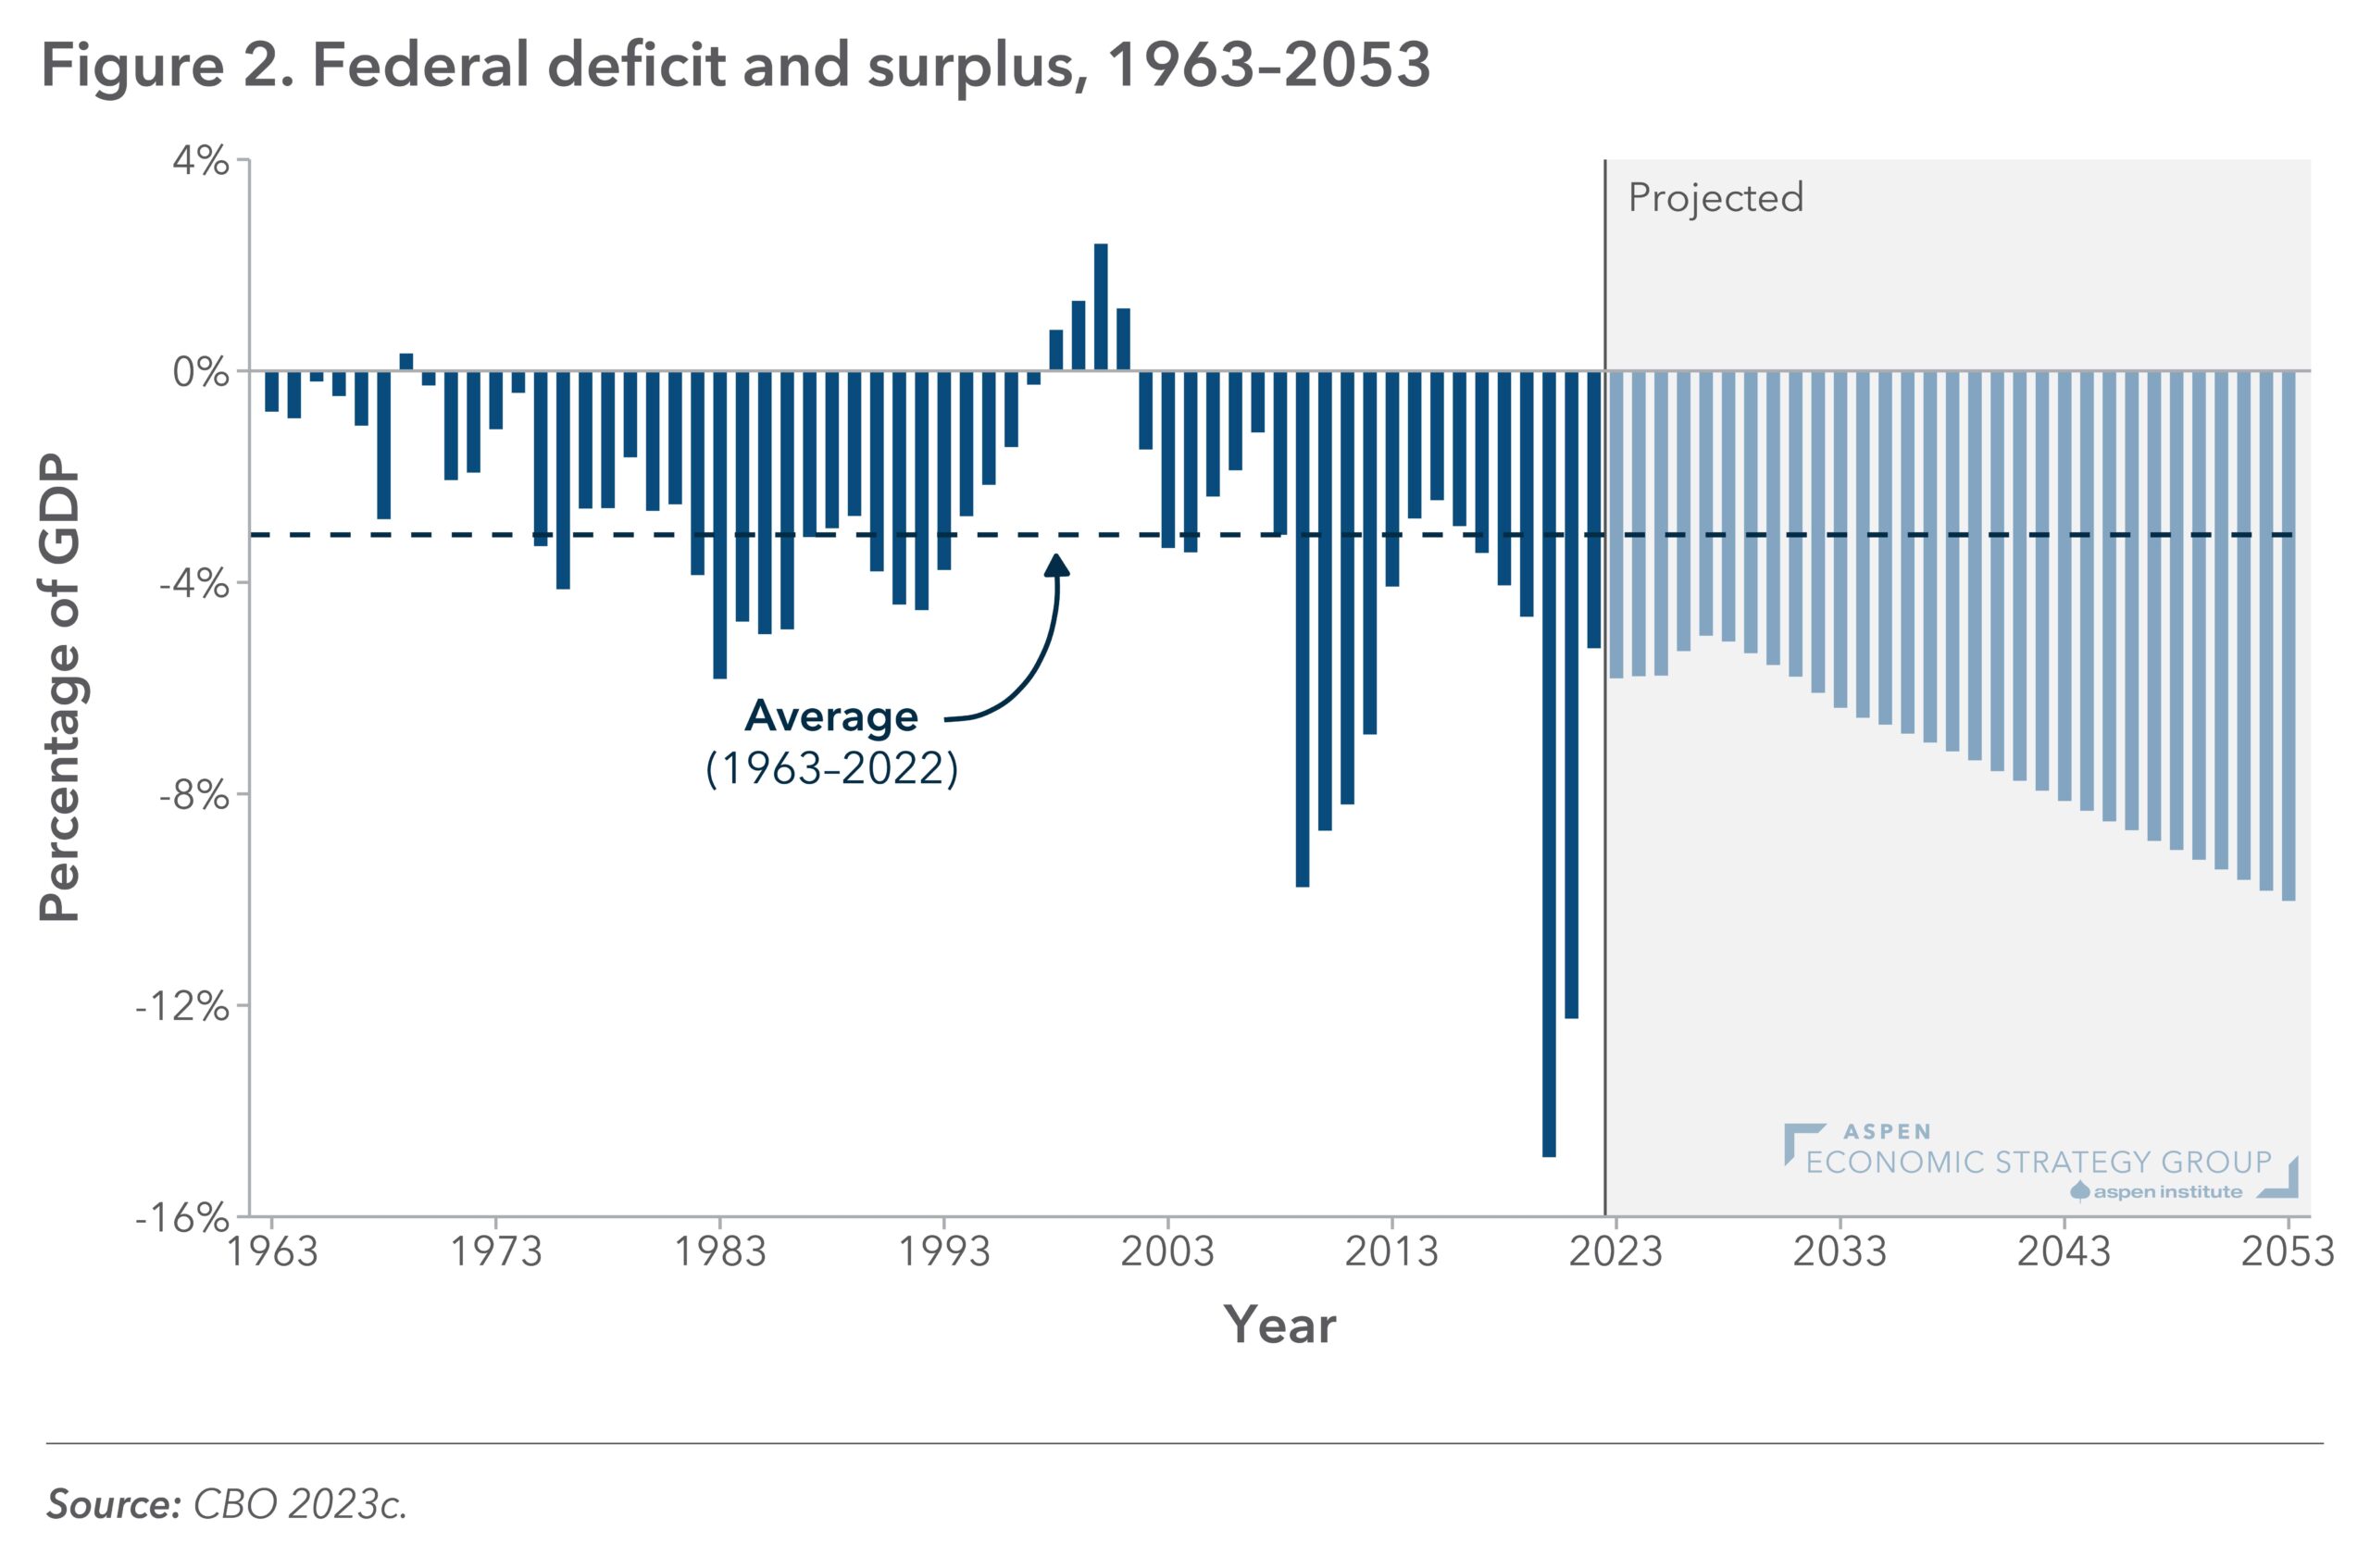 Figure 2: Federal deficit and surplus, 1963-2053